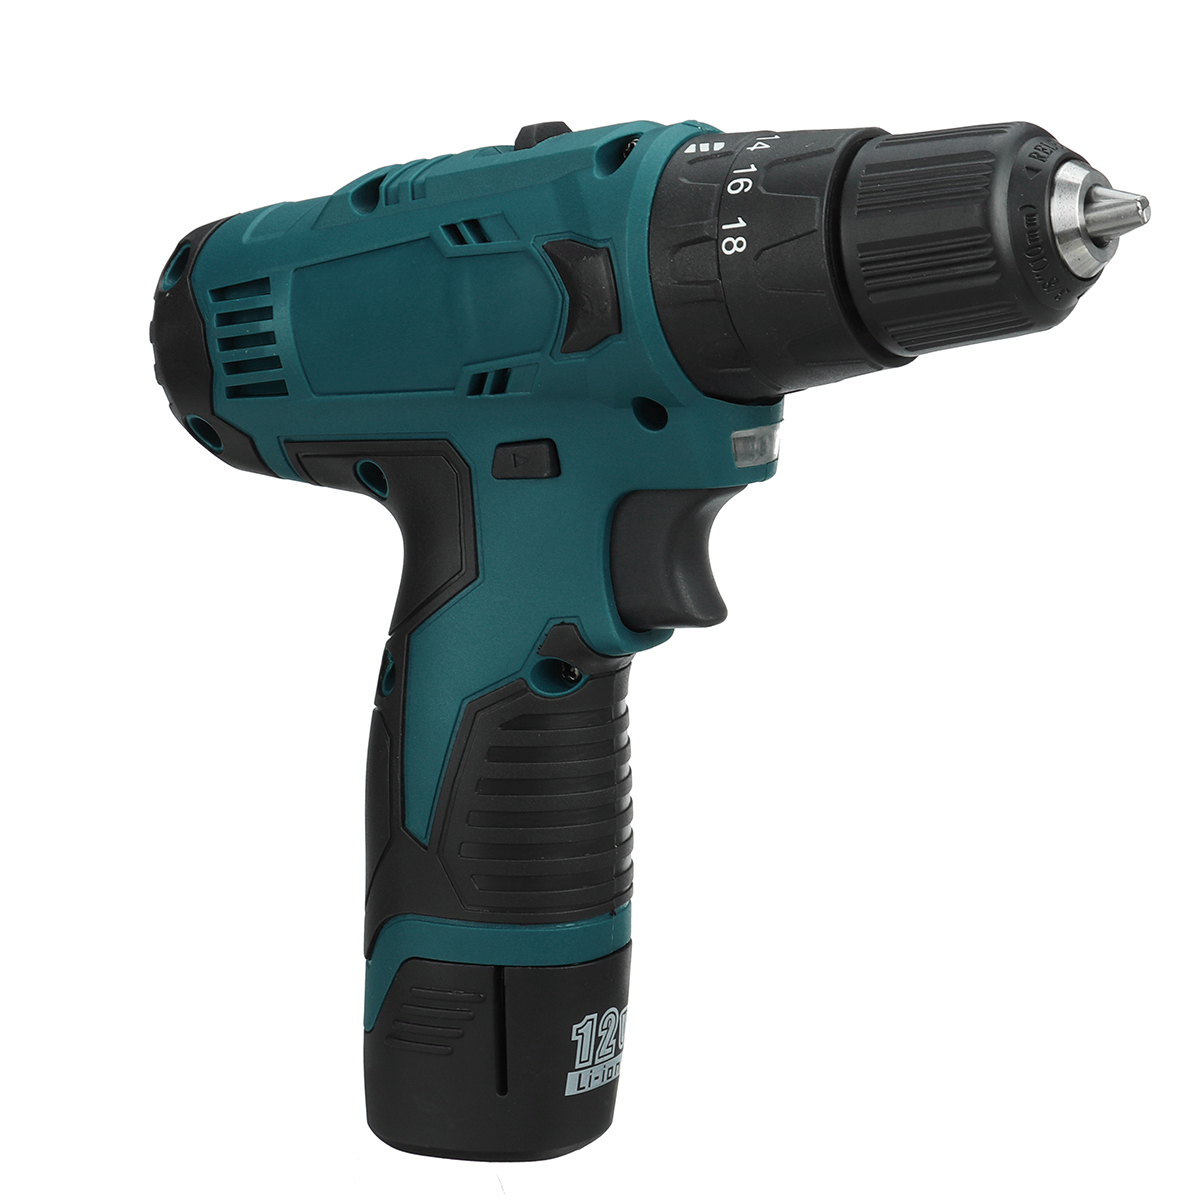 12V-1500mAh-3-IN-1-2-Speed-Cordless-Drill-Driver-Electric-Screwdriver-Hammer-Flat-Drill-183-Torque-1-1868432-8